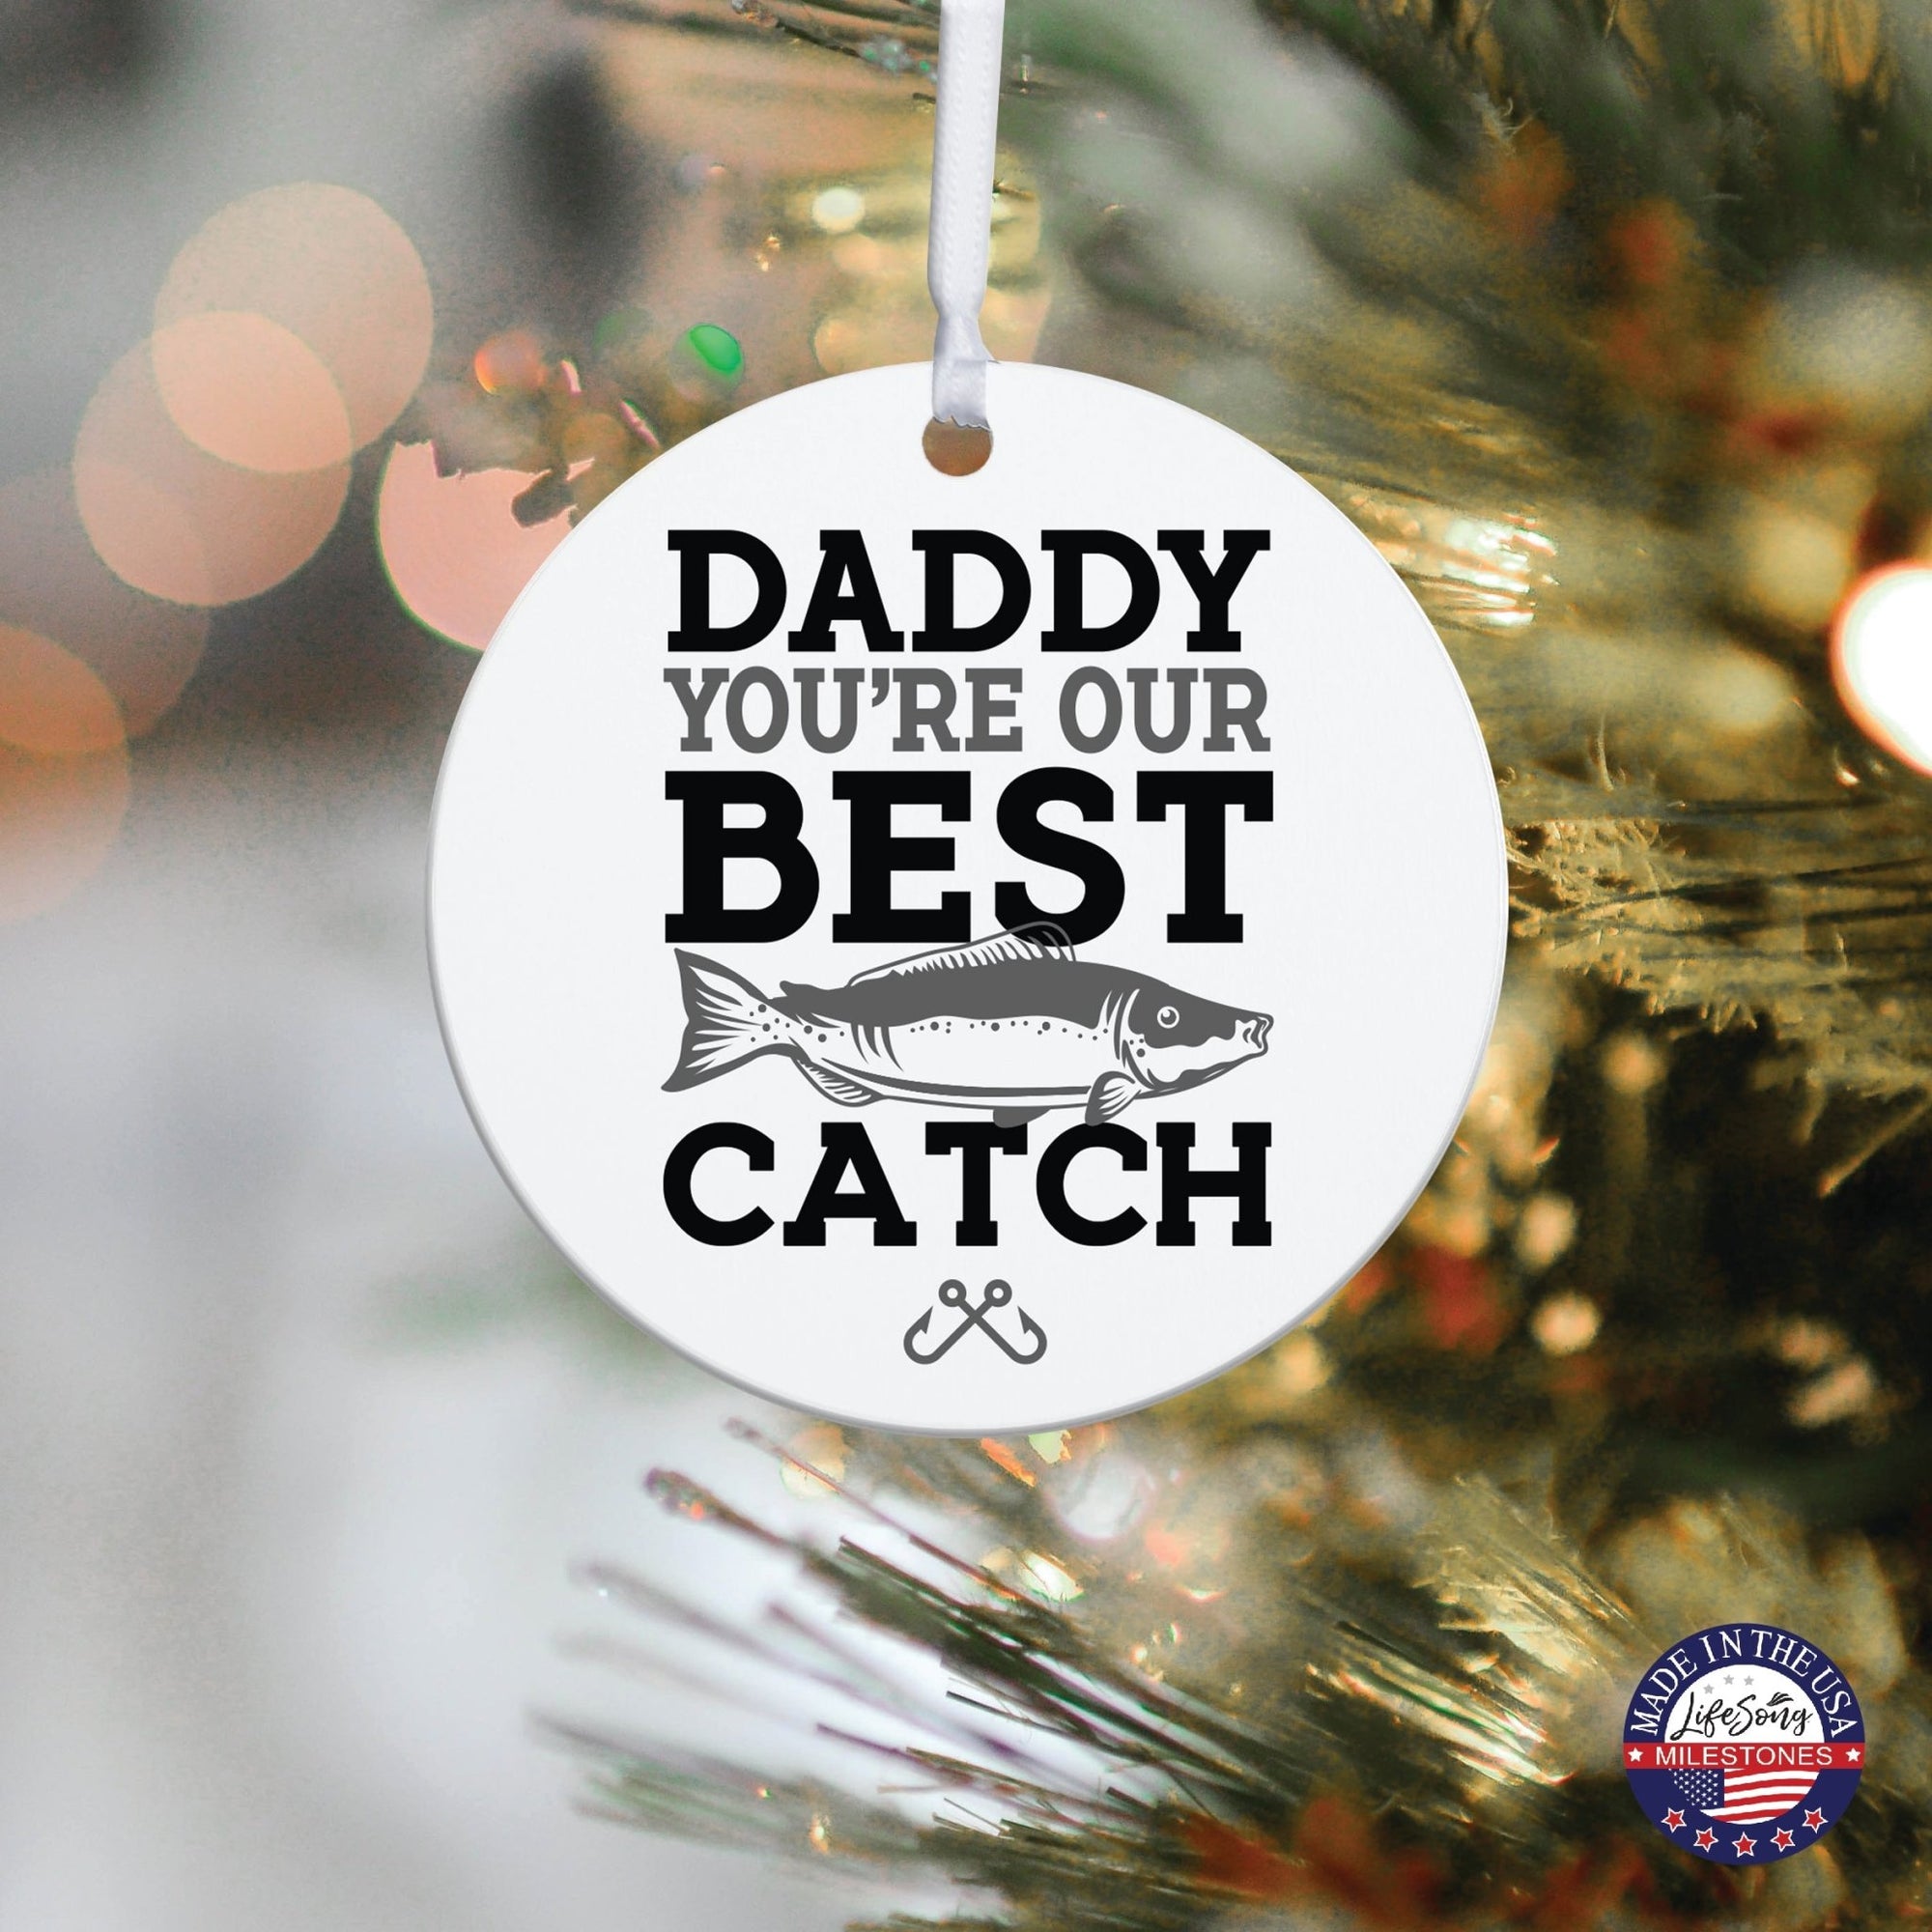 Fishing Dad White Ornament With Inspirational Message Gift Ideas - Daddy You're The Best Catch - LifeSong Milestones